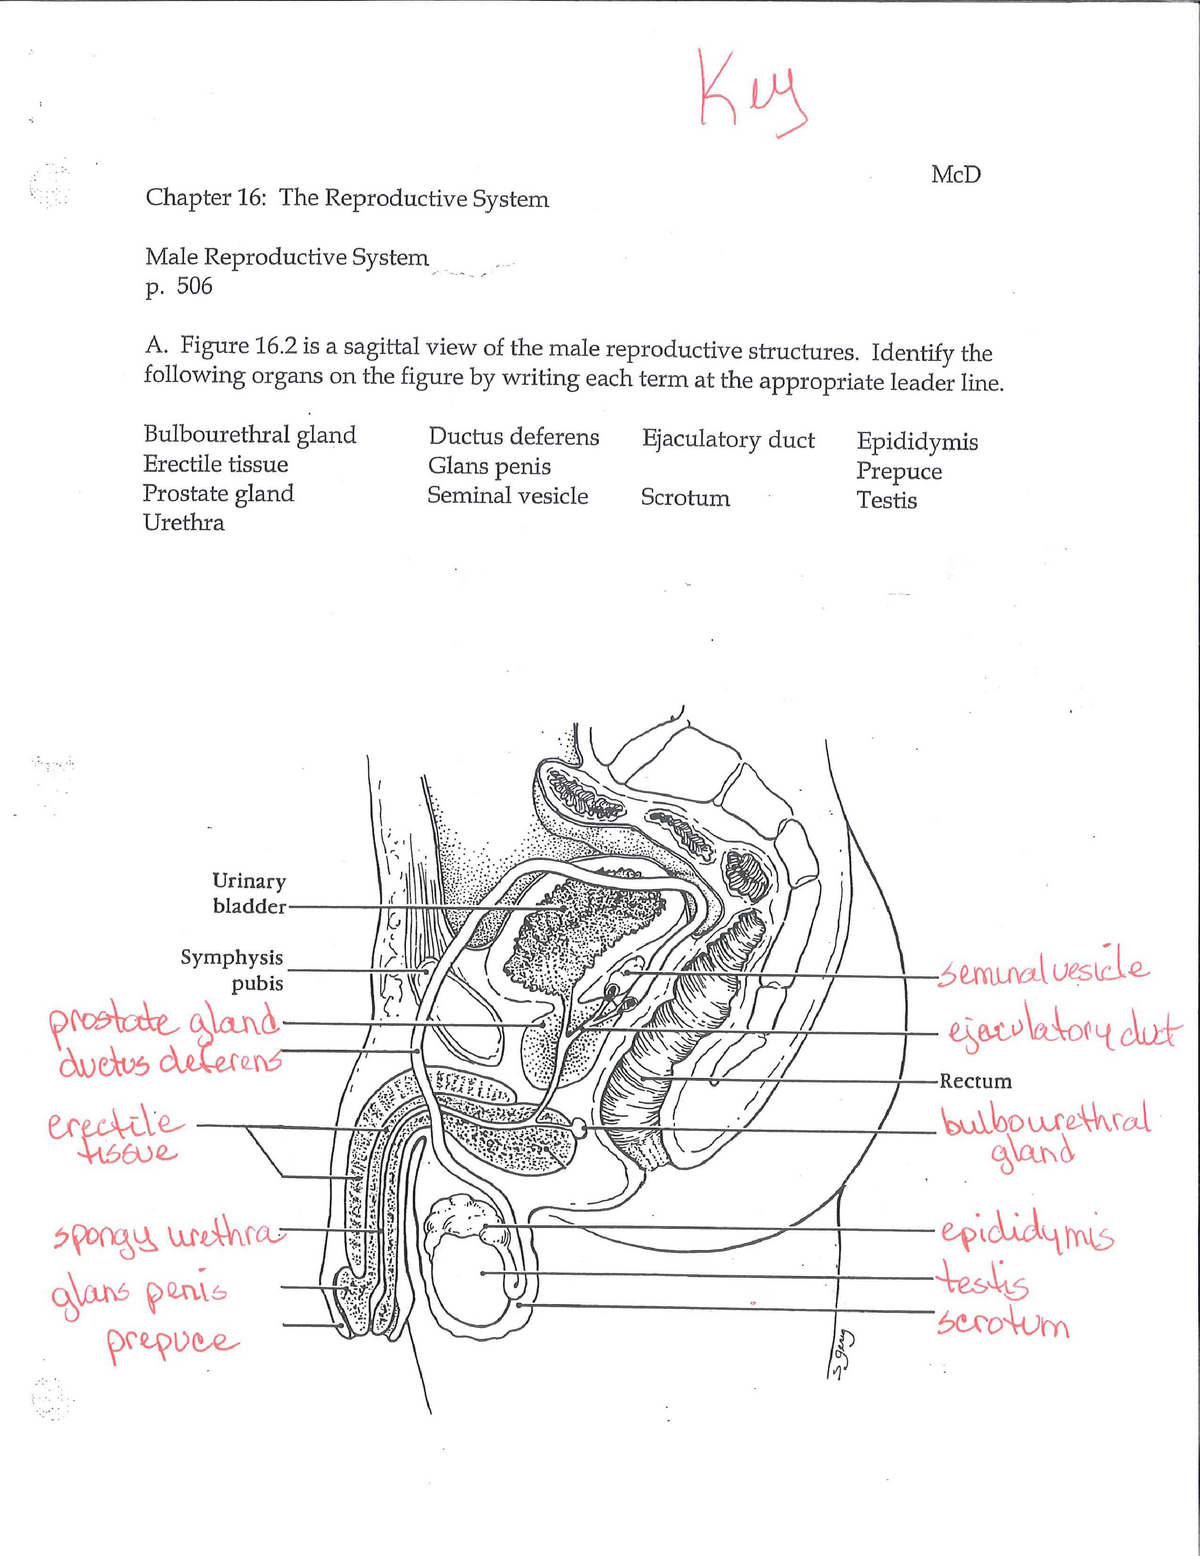 Male Repro Key Mcd Chapter 16 The Reproductive System Male Reproductive System P 506 A 1970